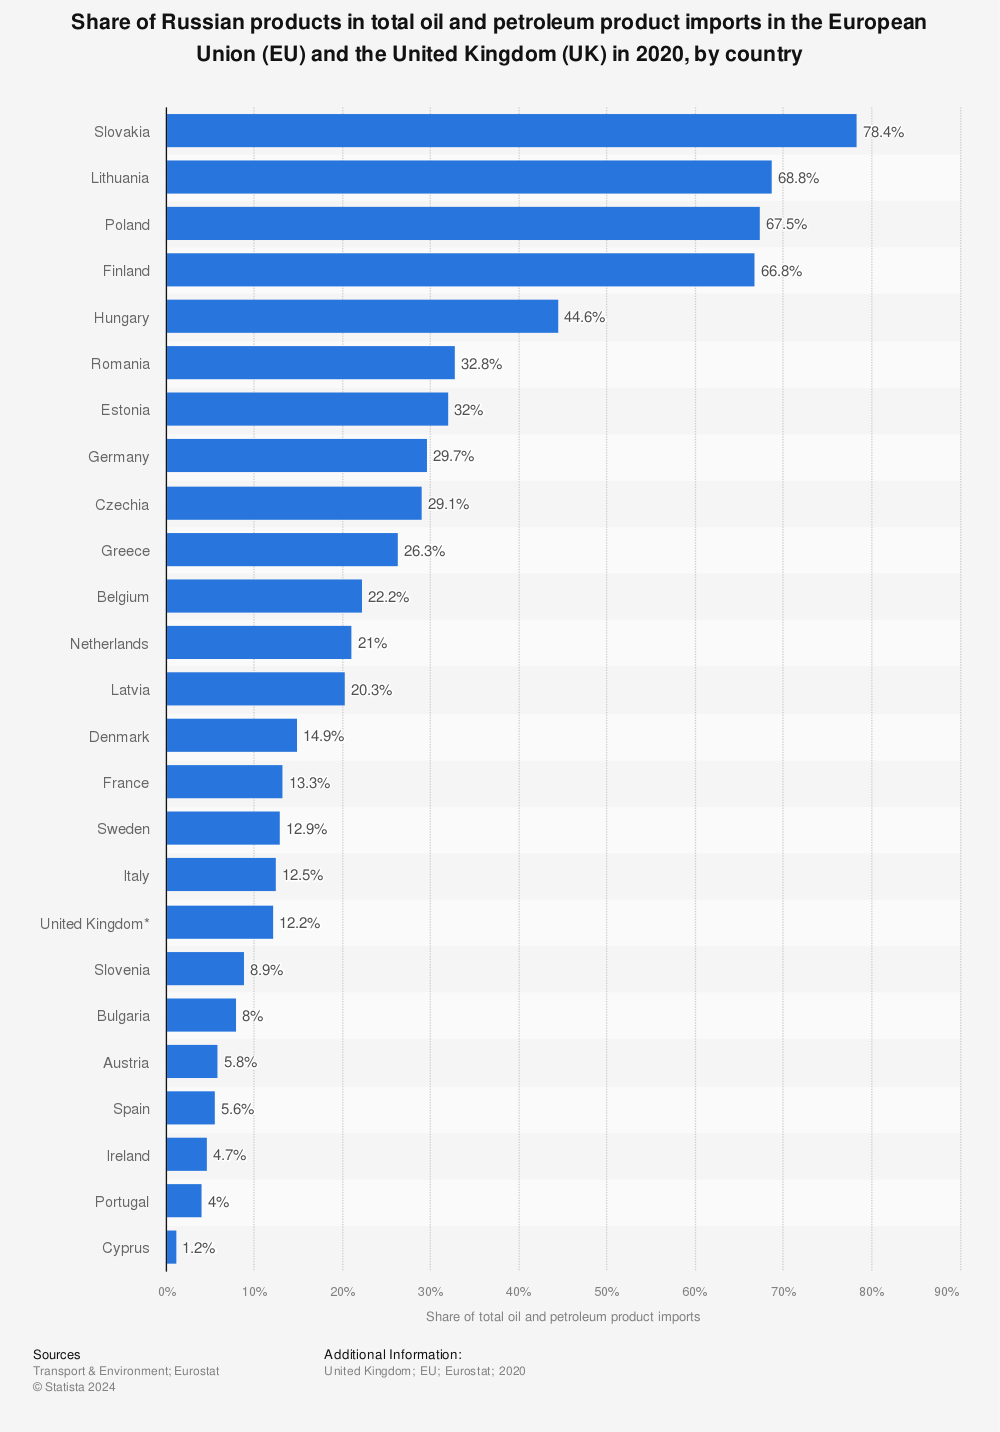 Statistic: Share of Russian products in total oil and petroleum product imports in the European Union (EU) and the United Kingdom (UK) in 2020, by country | Statista